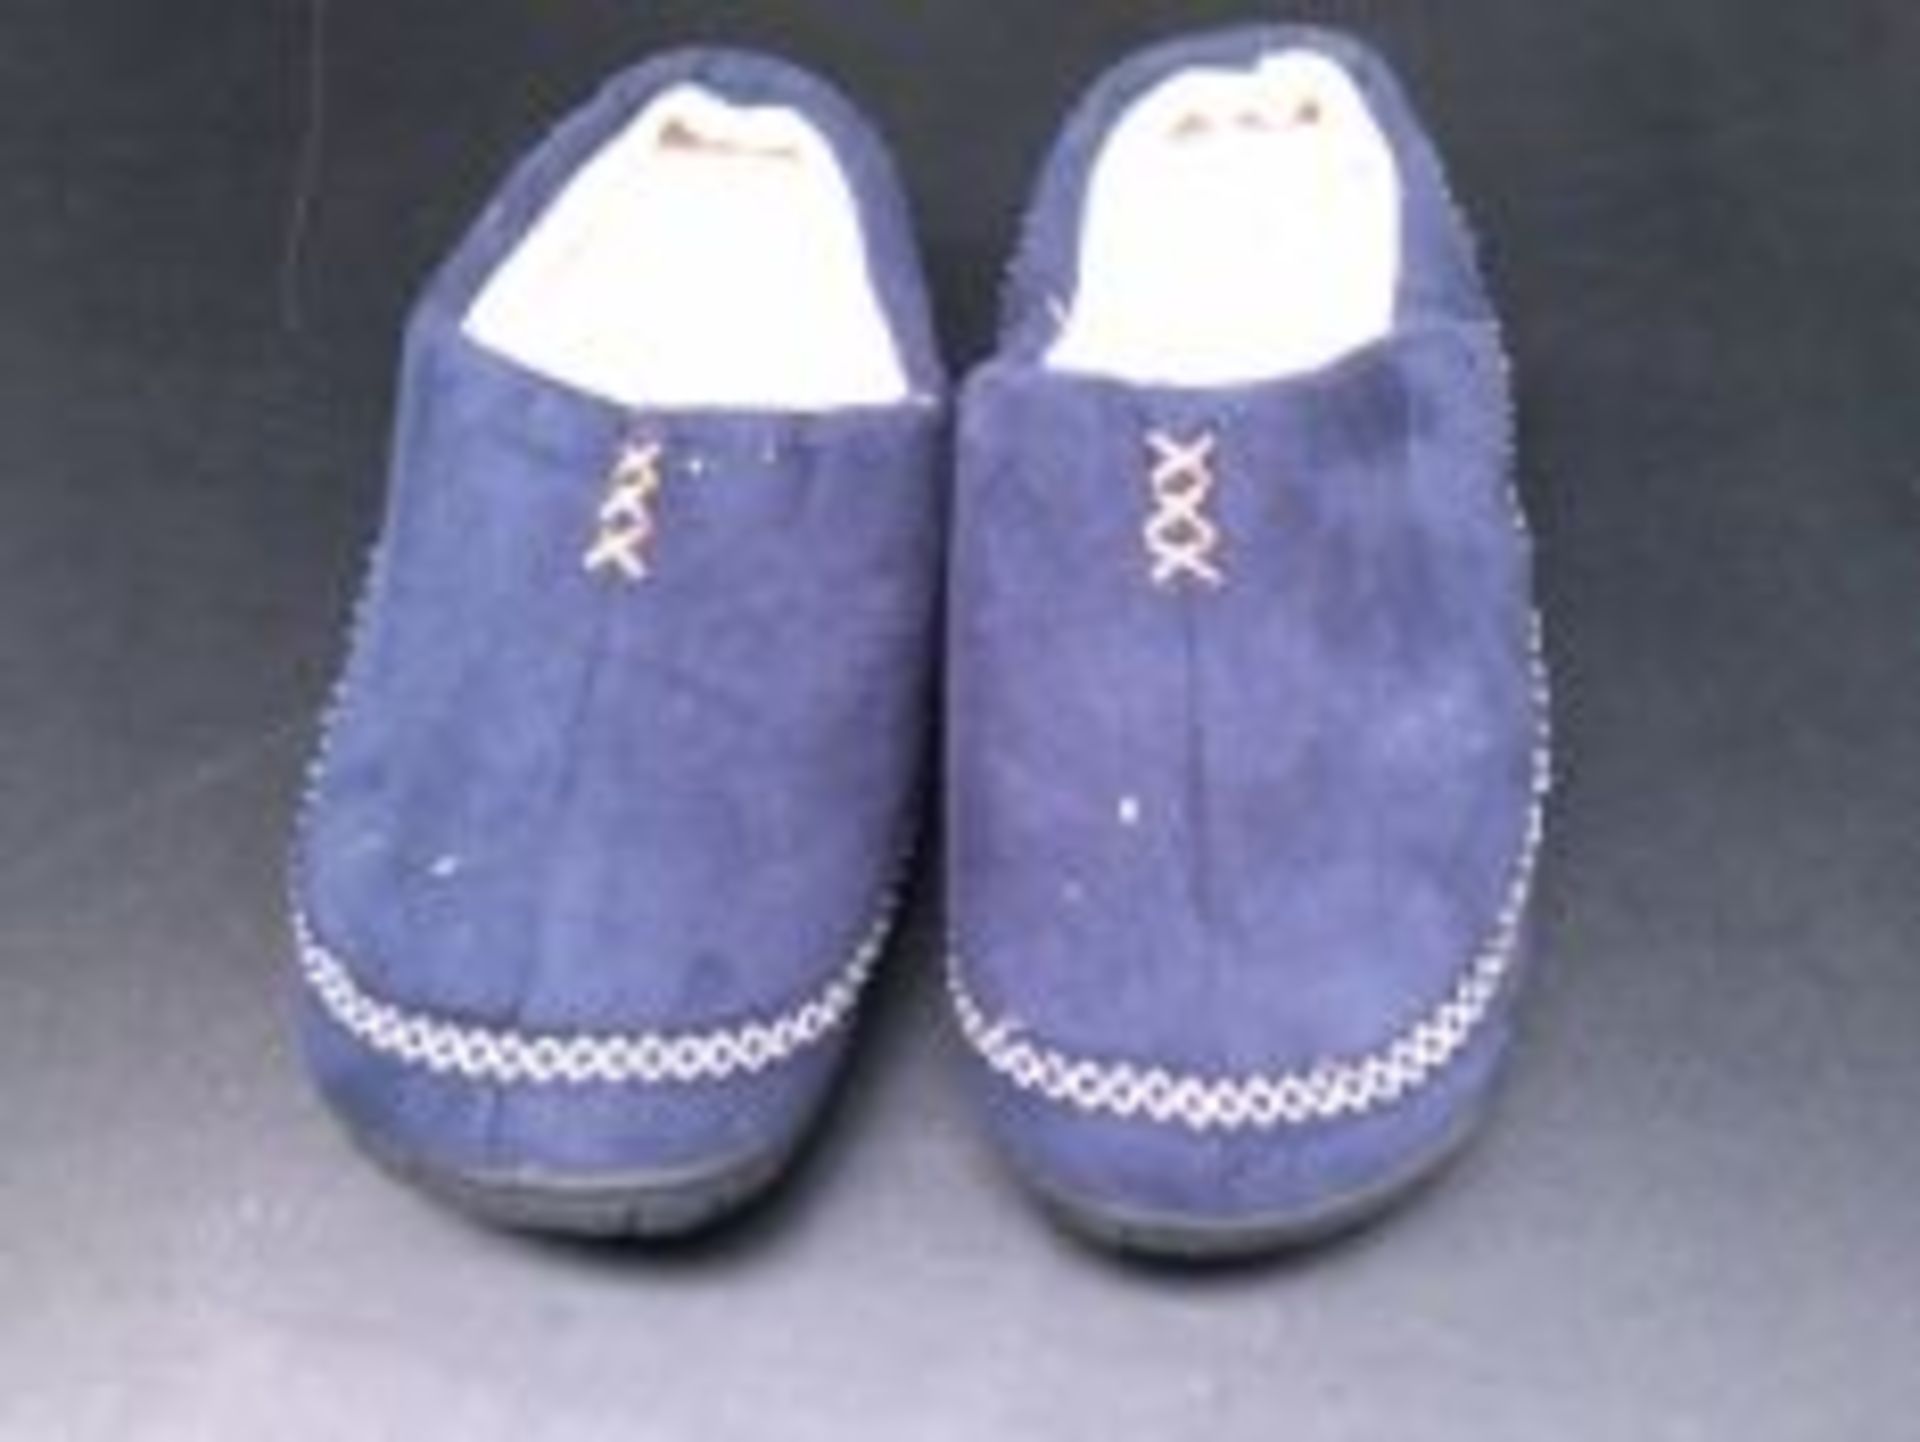 Mens Cooler Slipprs Size 7/8 (Delivery Band A)